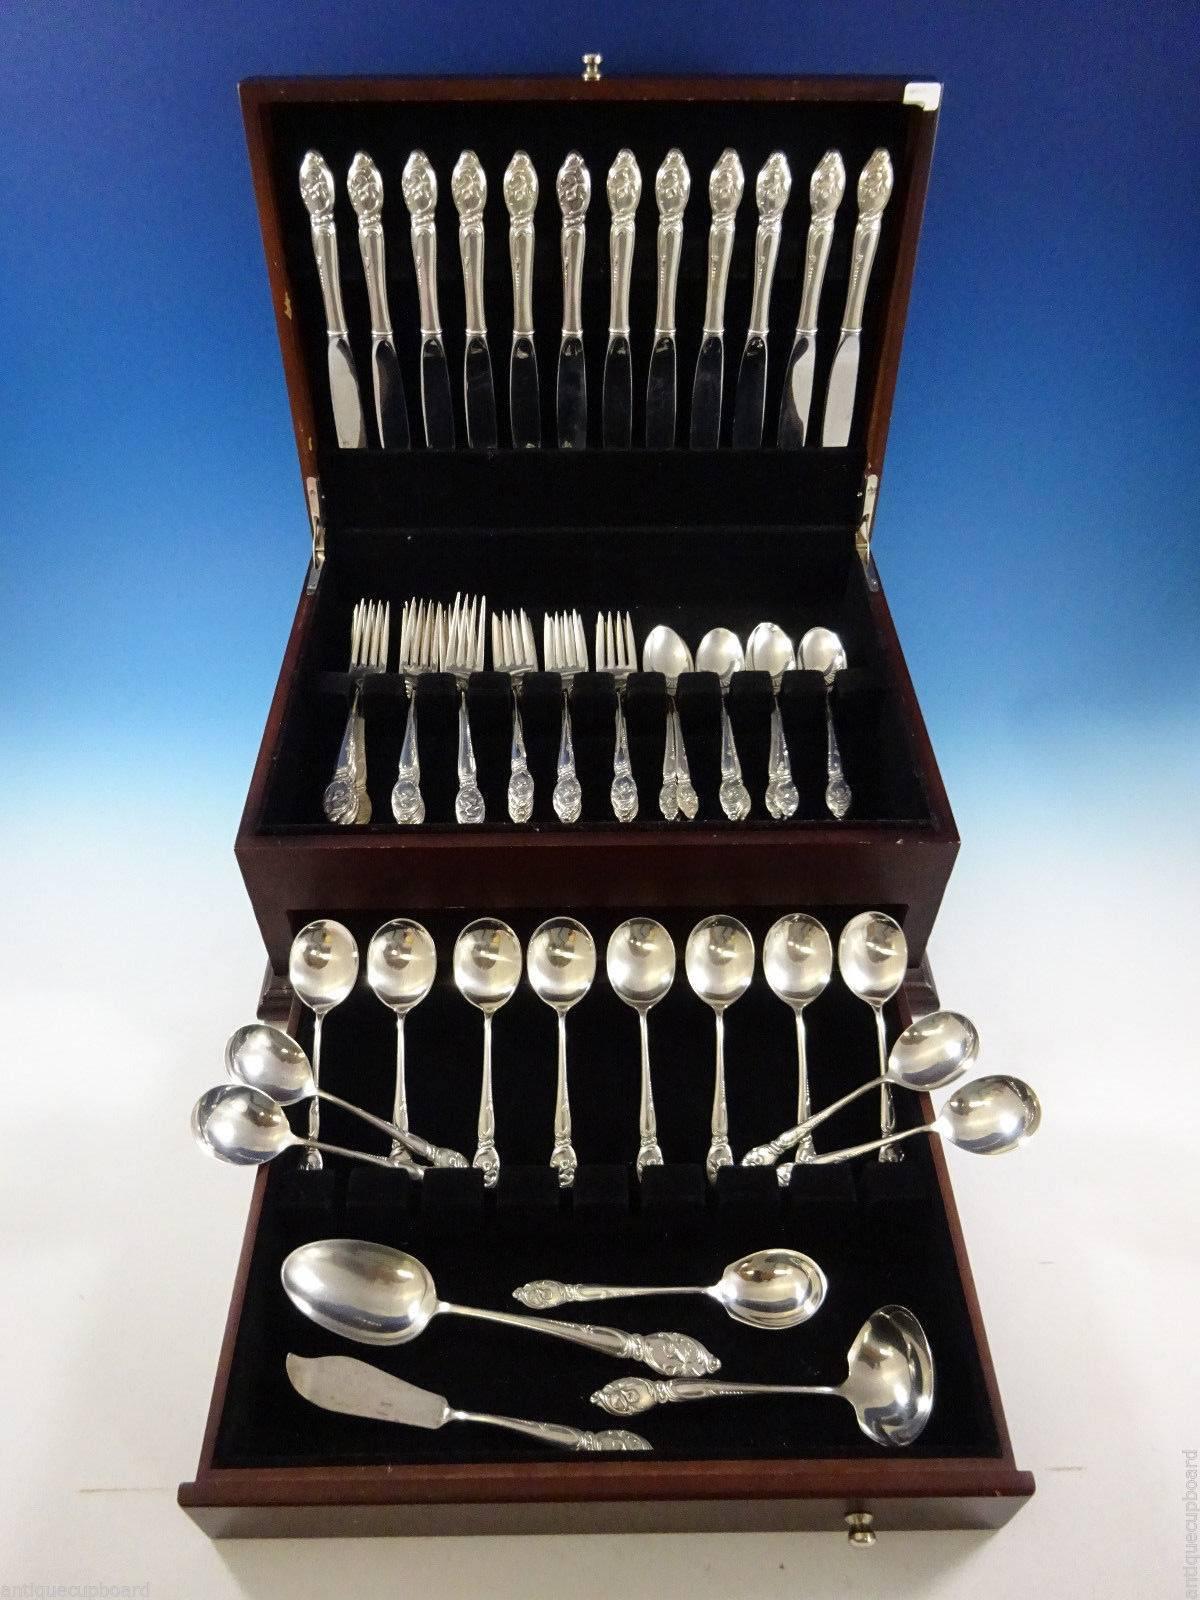 Enchanting orchid by Westmorland sterling silver flatware set, 64 pieces. This set includes: 

12 knives, 9